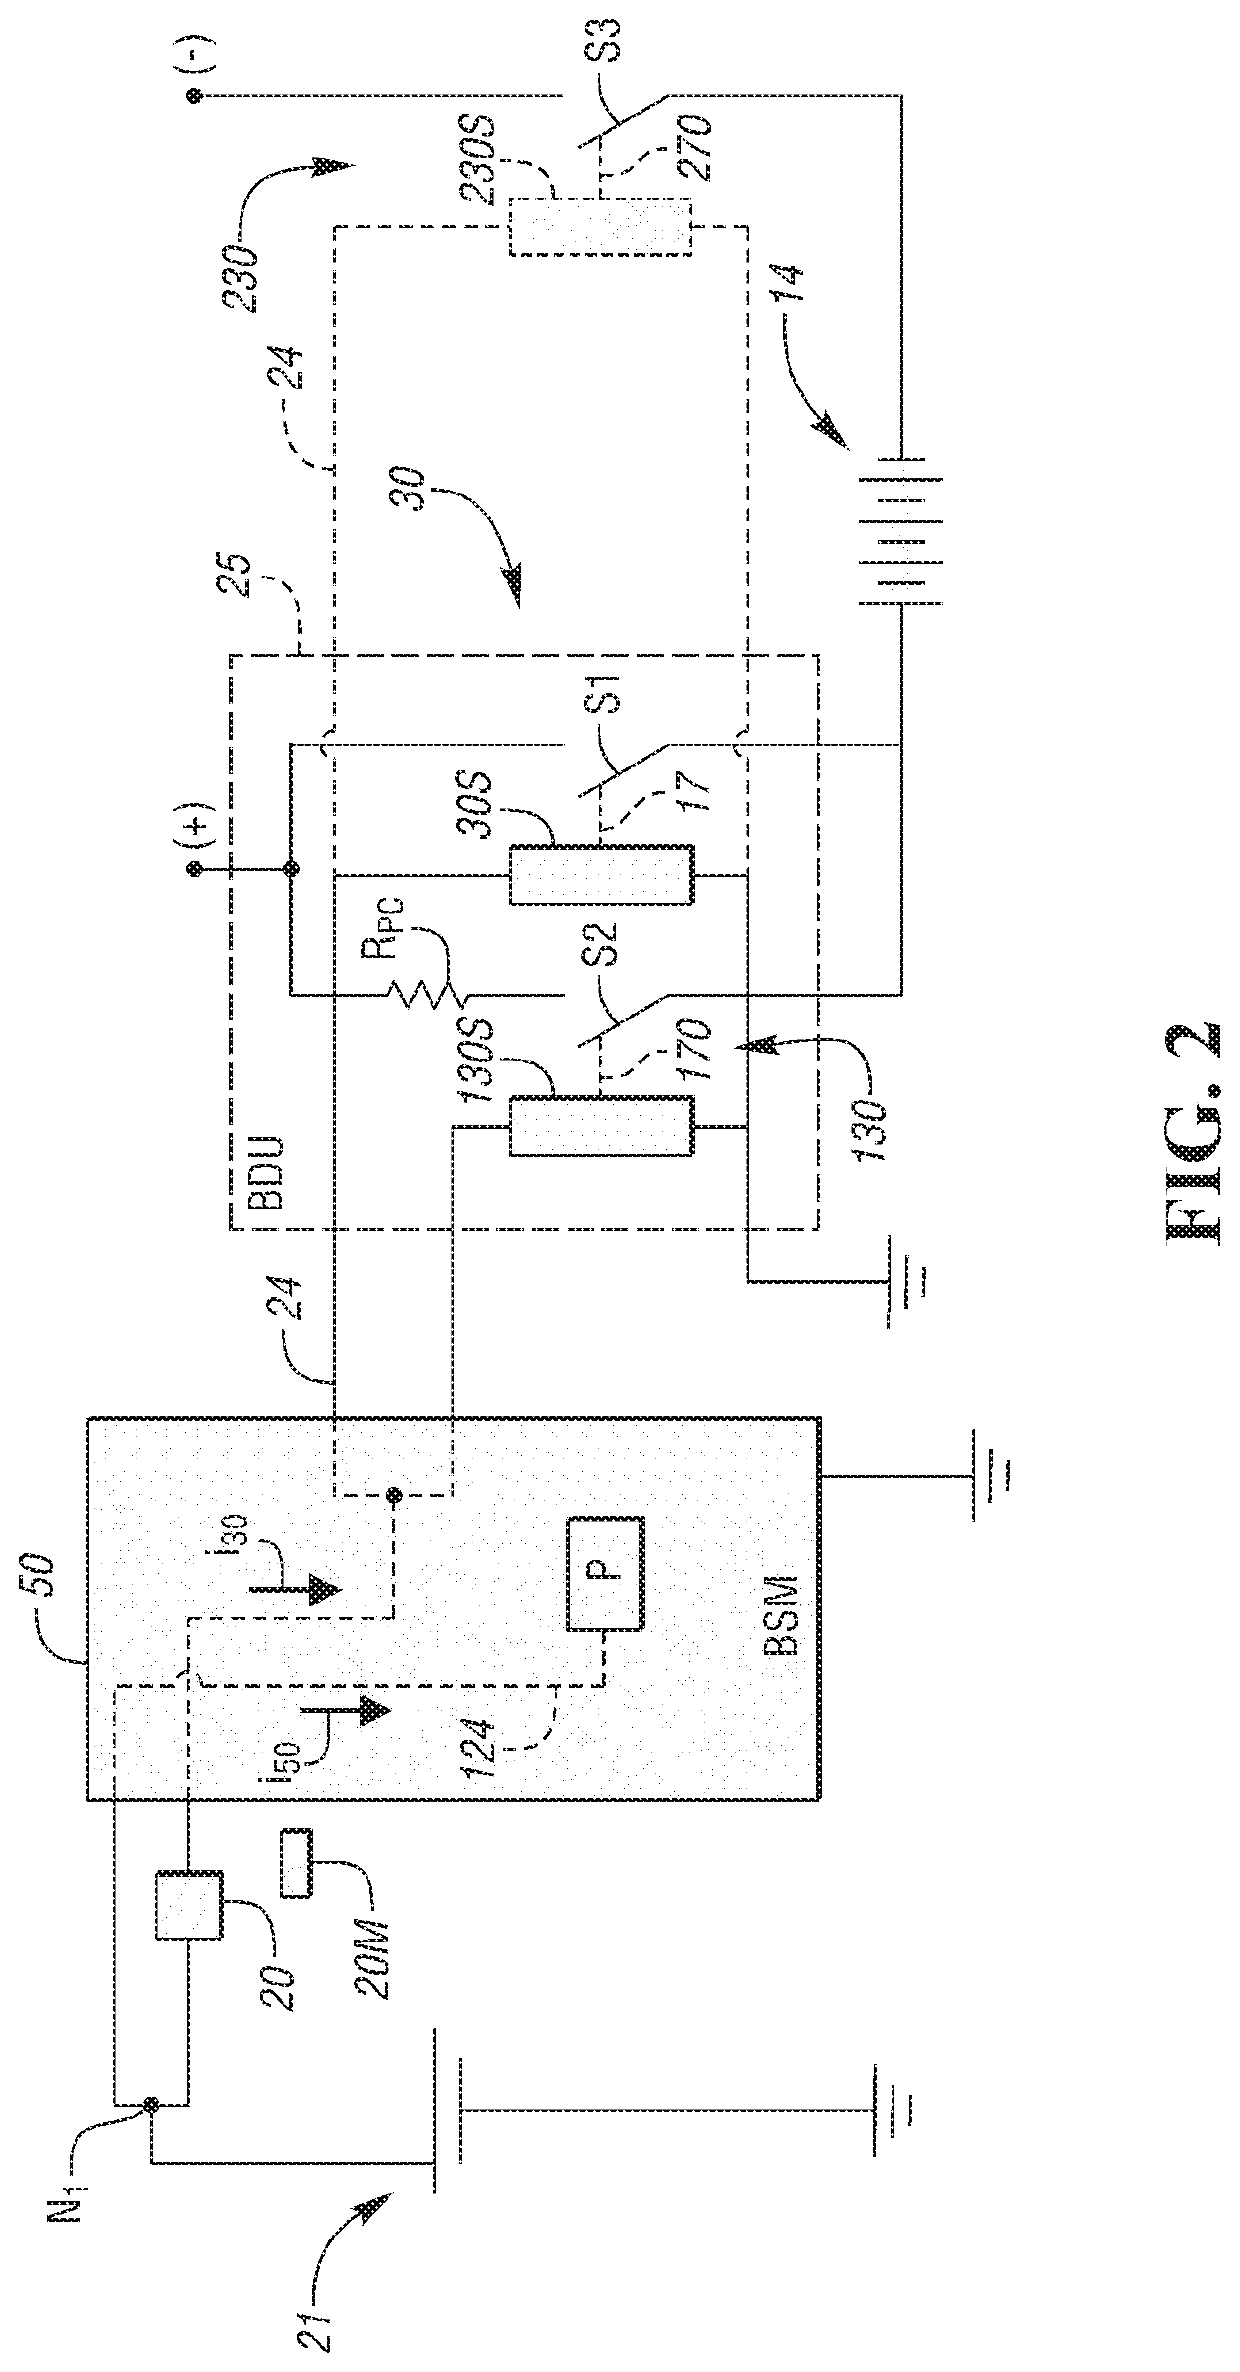 Electrical system with high-voltage system lockout function